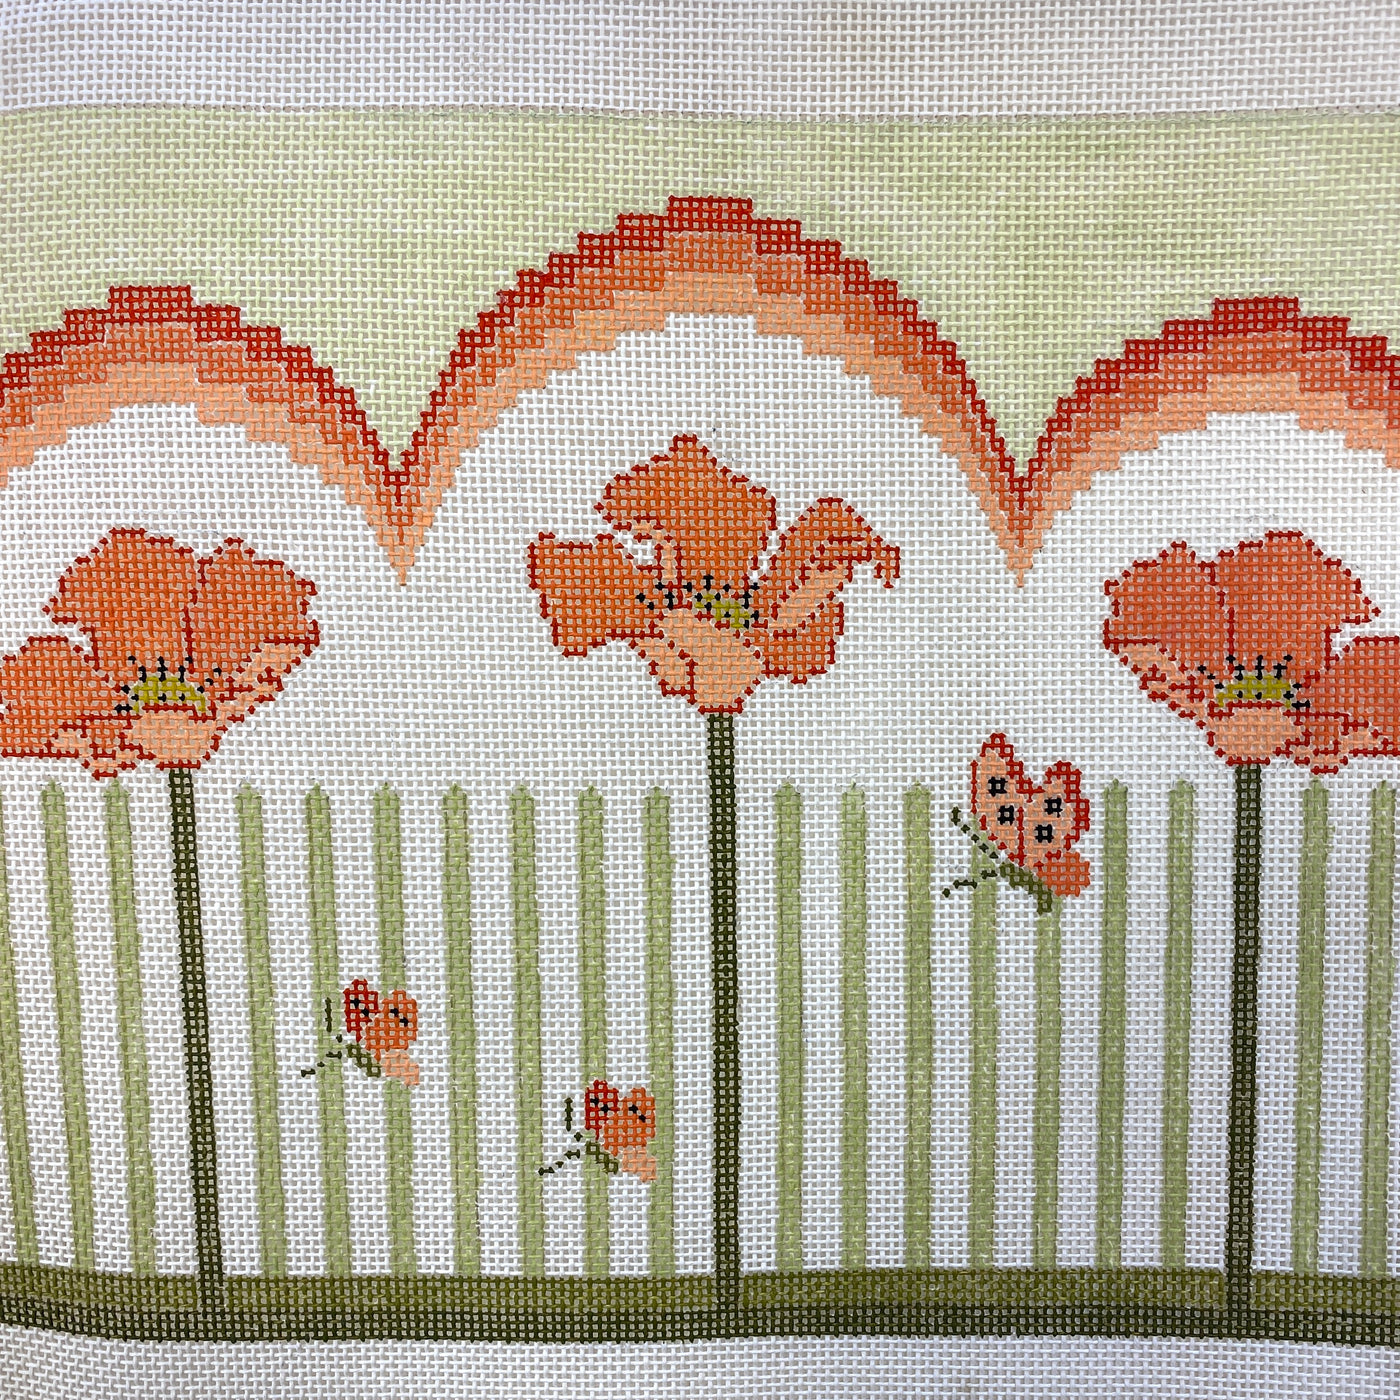 Orange Poppies and Butterflies with Bargello Top - Vintage Needlepoint Canvas